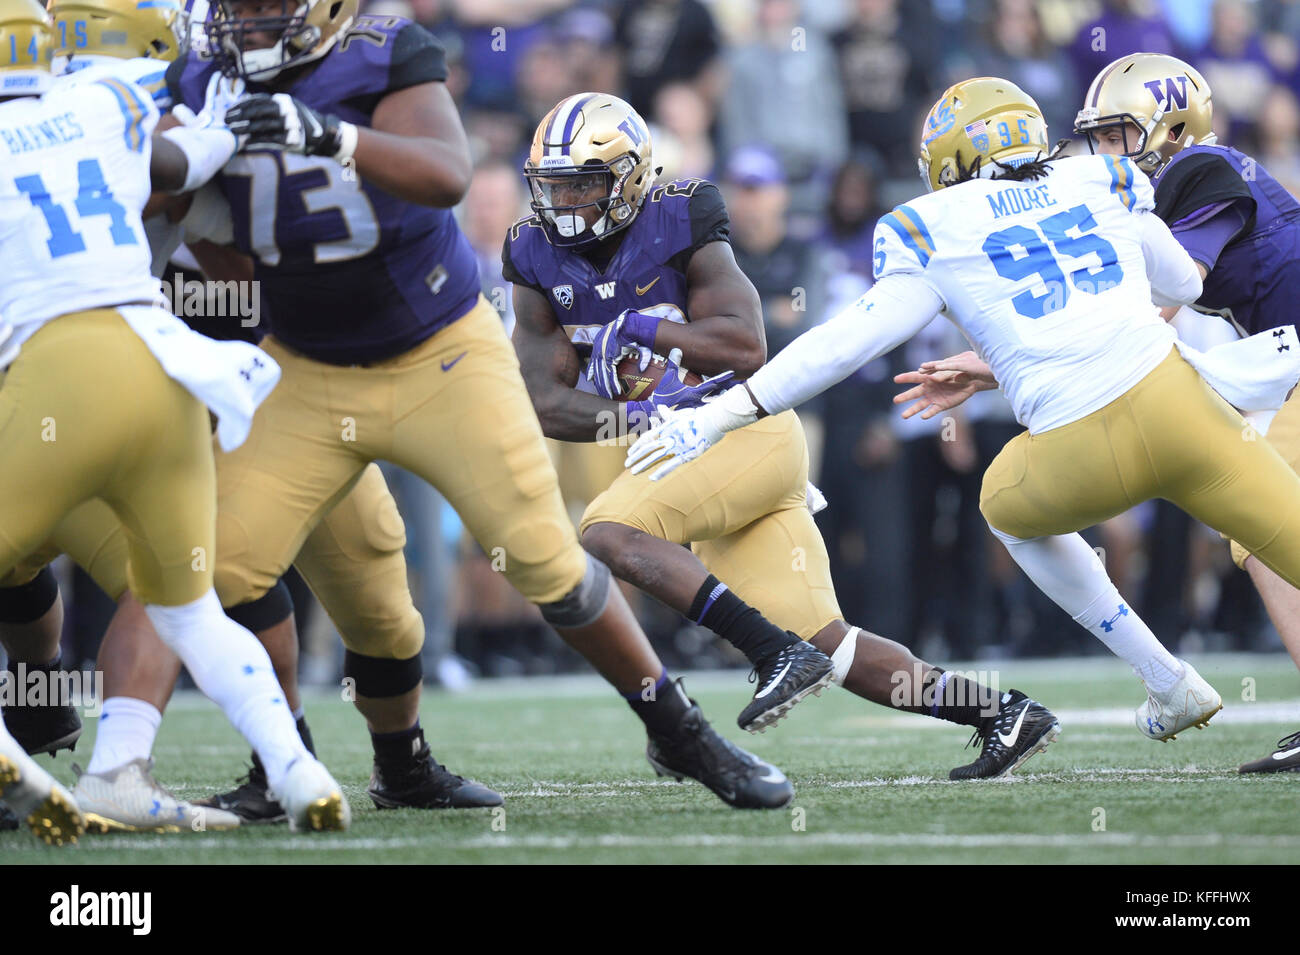 Seattle, WA, USA. 28th Oct, 2017. UCLA lineman Marcus Moore (95) puts pressure on UW tailback Myles Gaskin (9) during a PAC12 football game between the UCLA Bruins and the Washington Huskies. The game was played at Husky Stadium on the University of Washington campus in Seattle, WA. Jeff Halstead/CSM/Alamy Live News Stock Photo